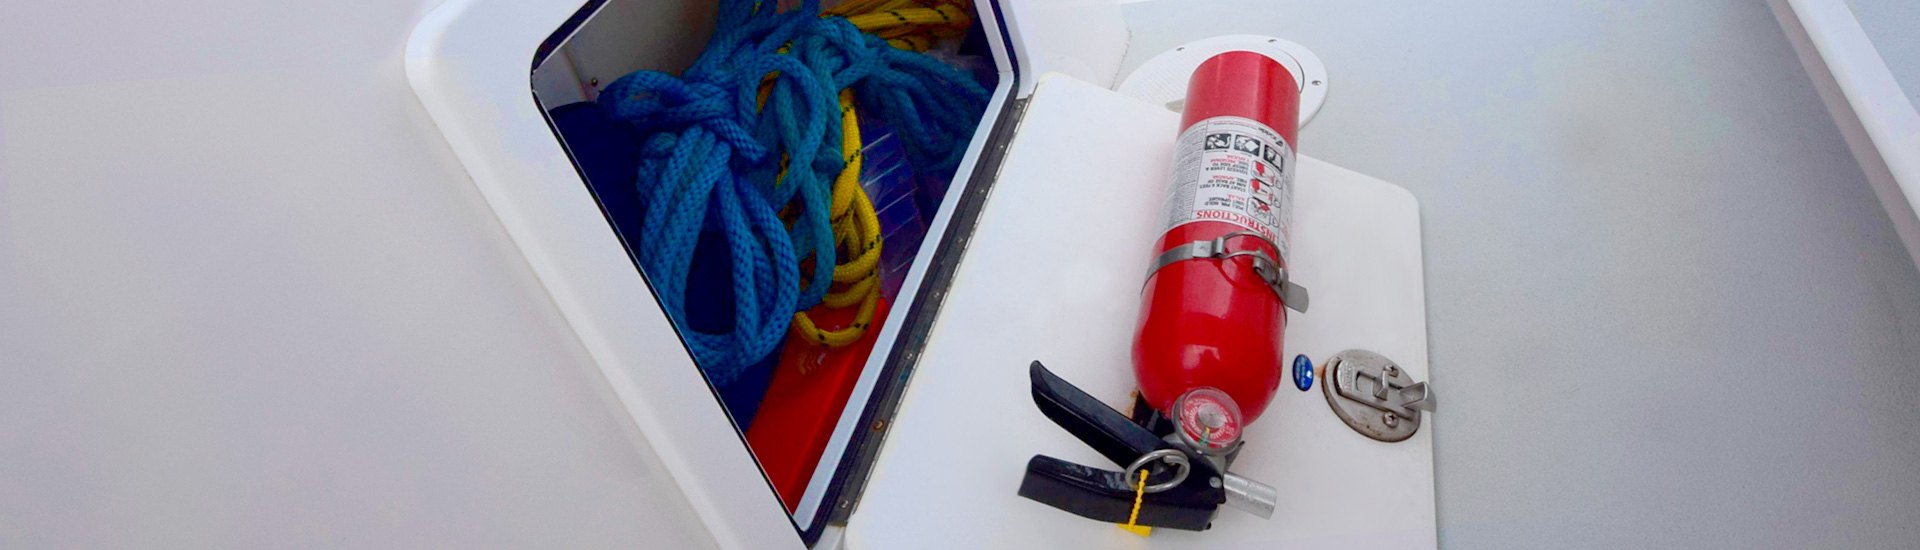 Your Boat Deserves the Best Fire Protection | Fire Extinguishers For All Water Vessels